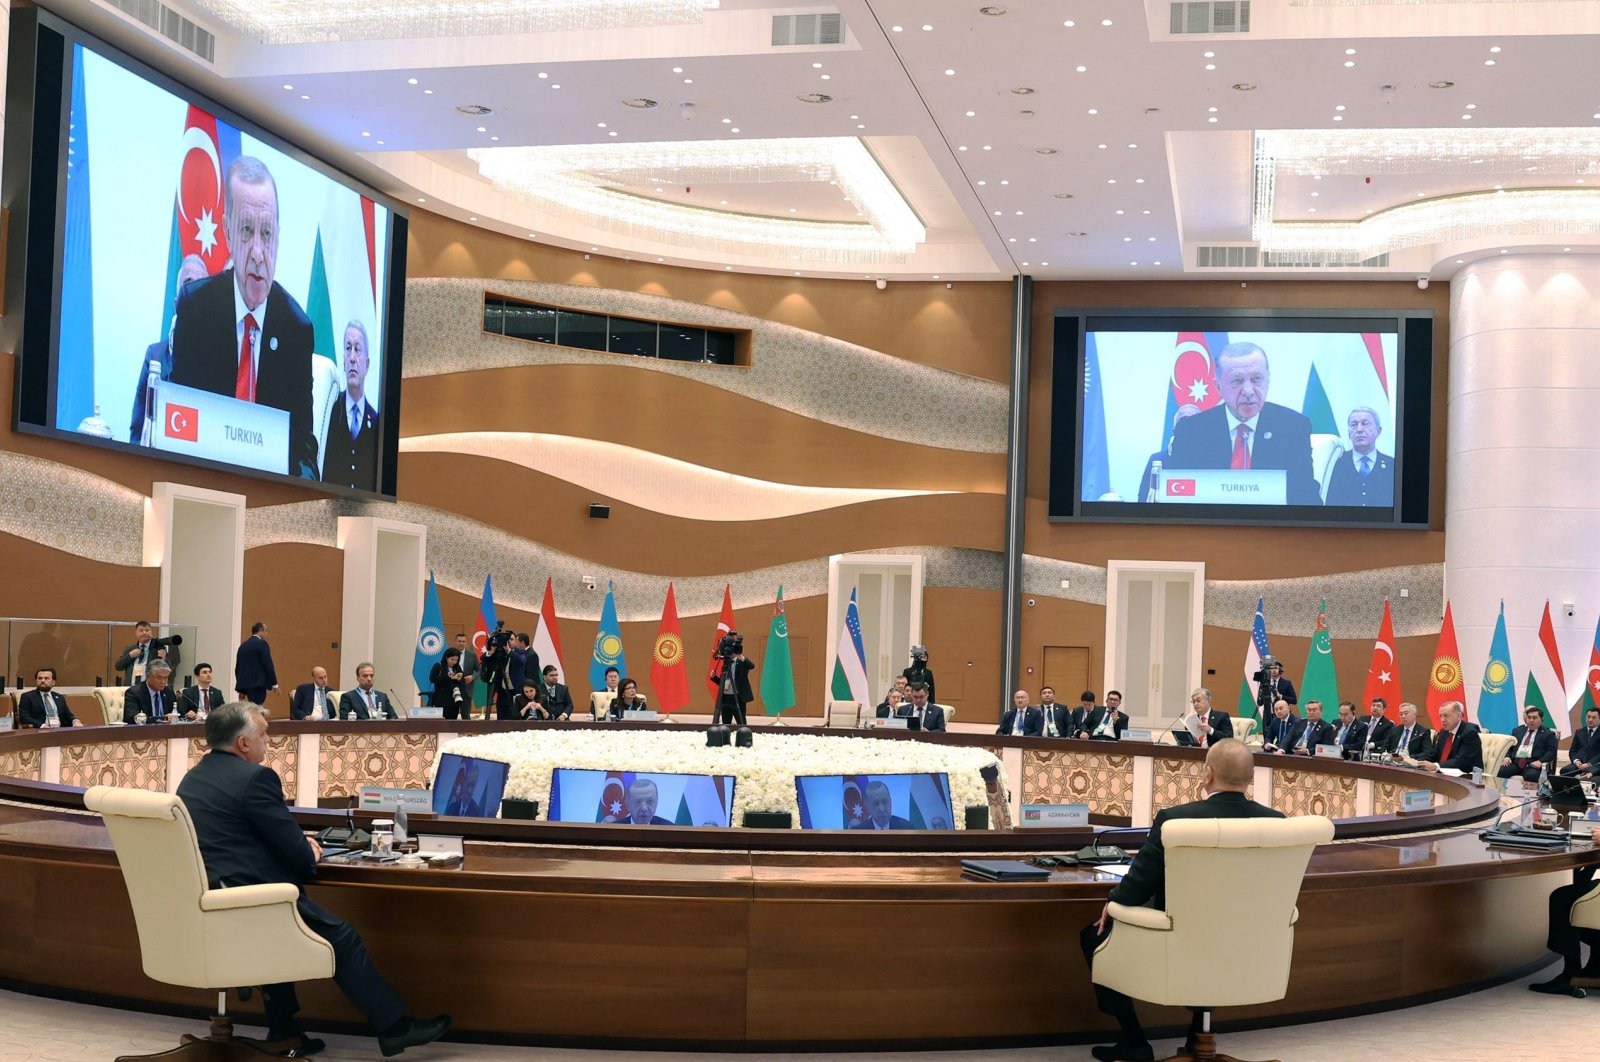 President Recep Tayyip Erdogan (on screen) speaks during the 9th Summit of the Organisation of Turkic States (OTS) at the Eternal City Convention Center, Samarkand, Uzbekistan, Nov. 11, 2022. (Handout by Press Office of the Presidency of Türkiye via AFP)